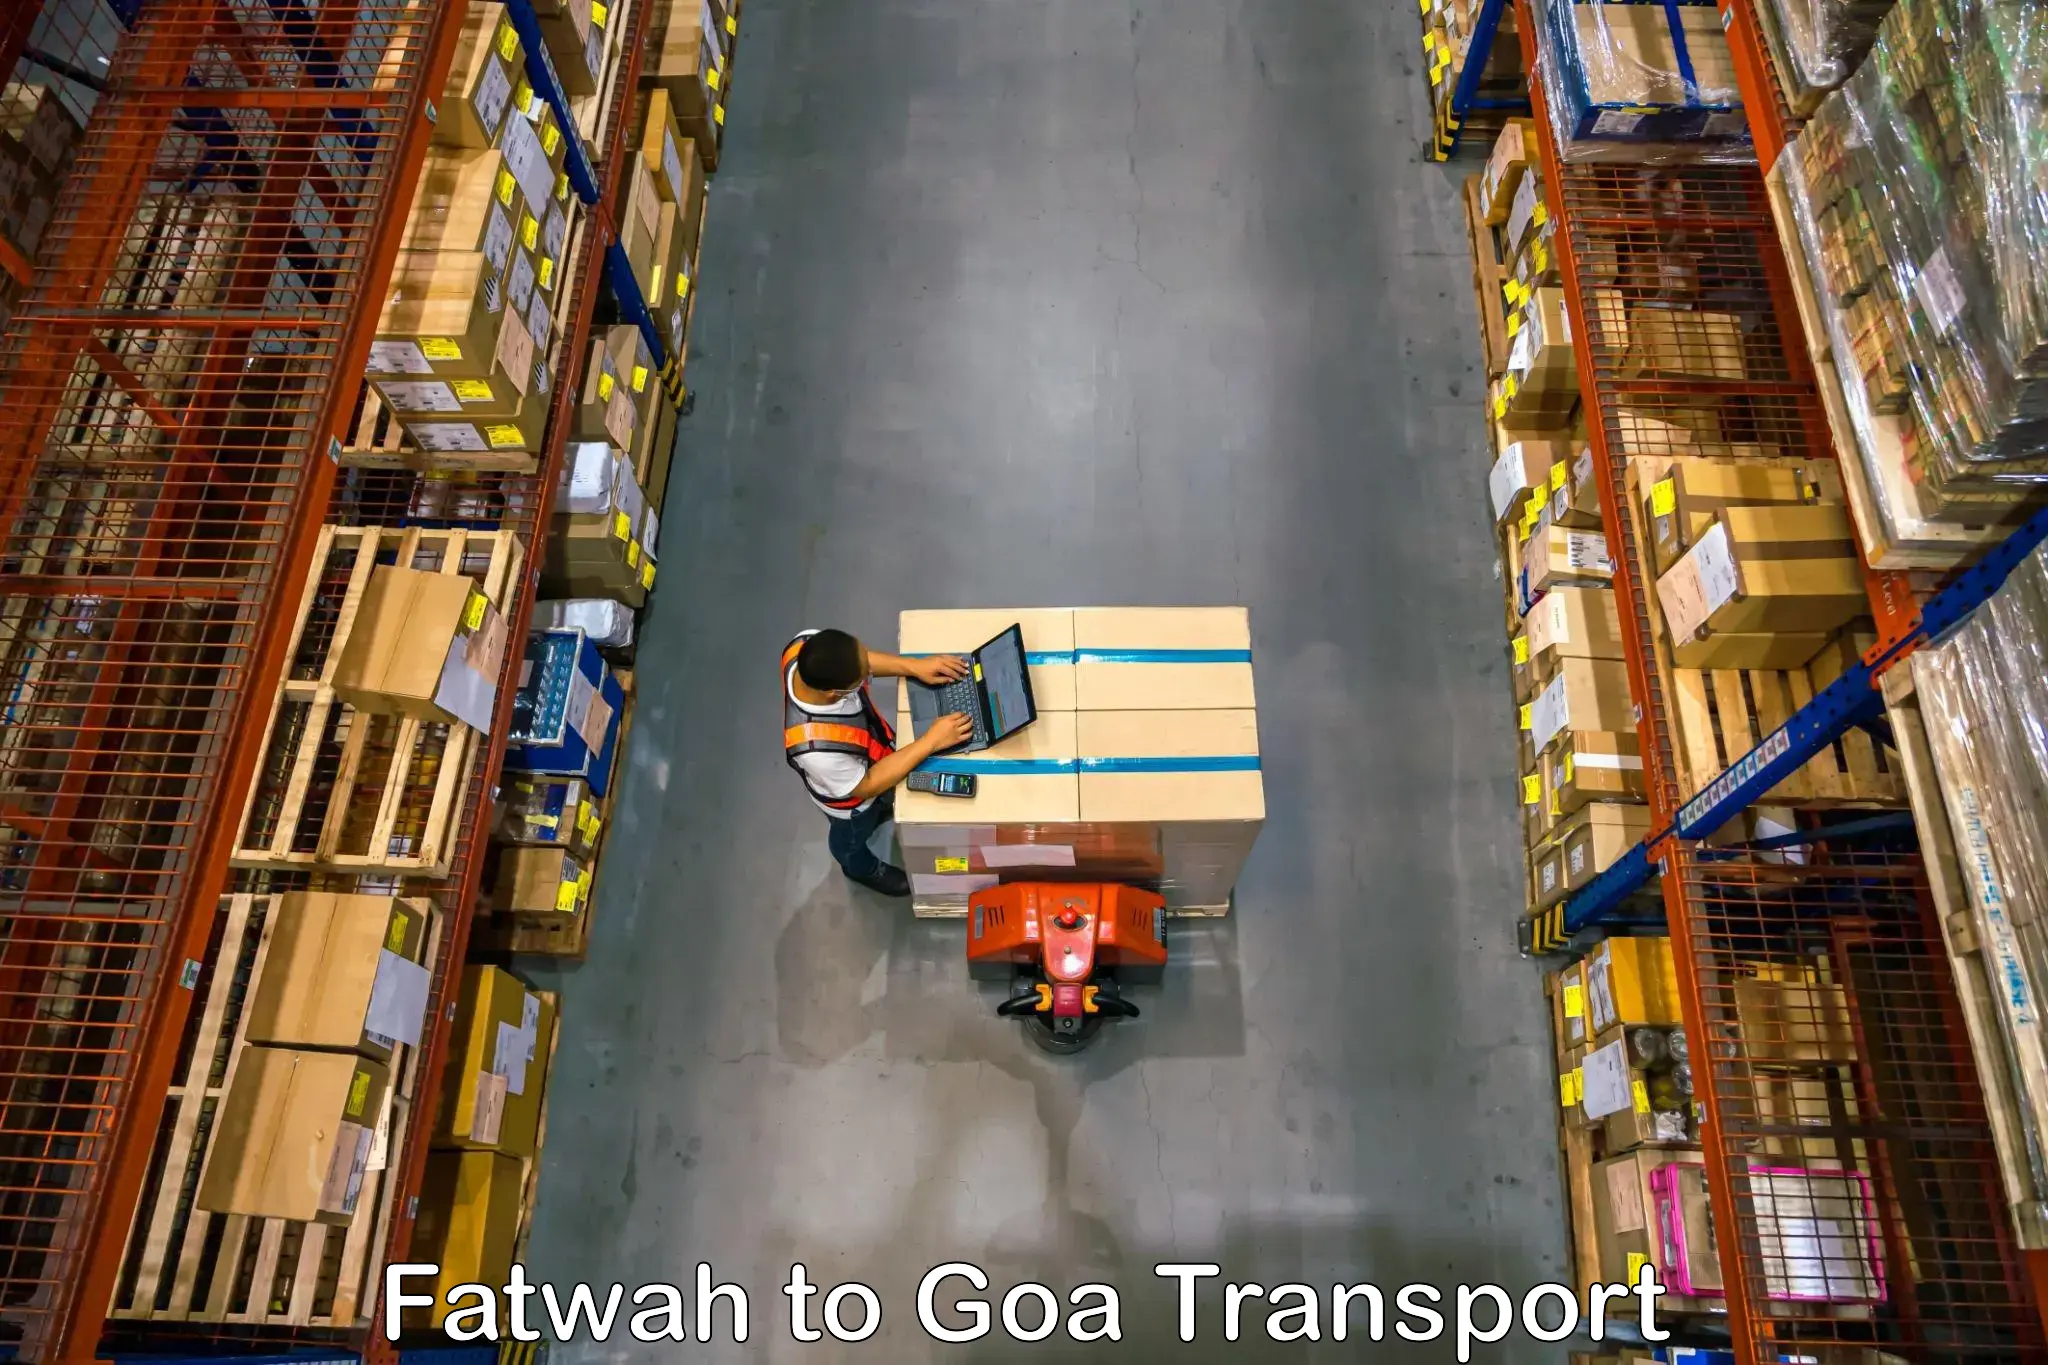 Nearby transport service Fatwah to Goa